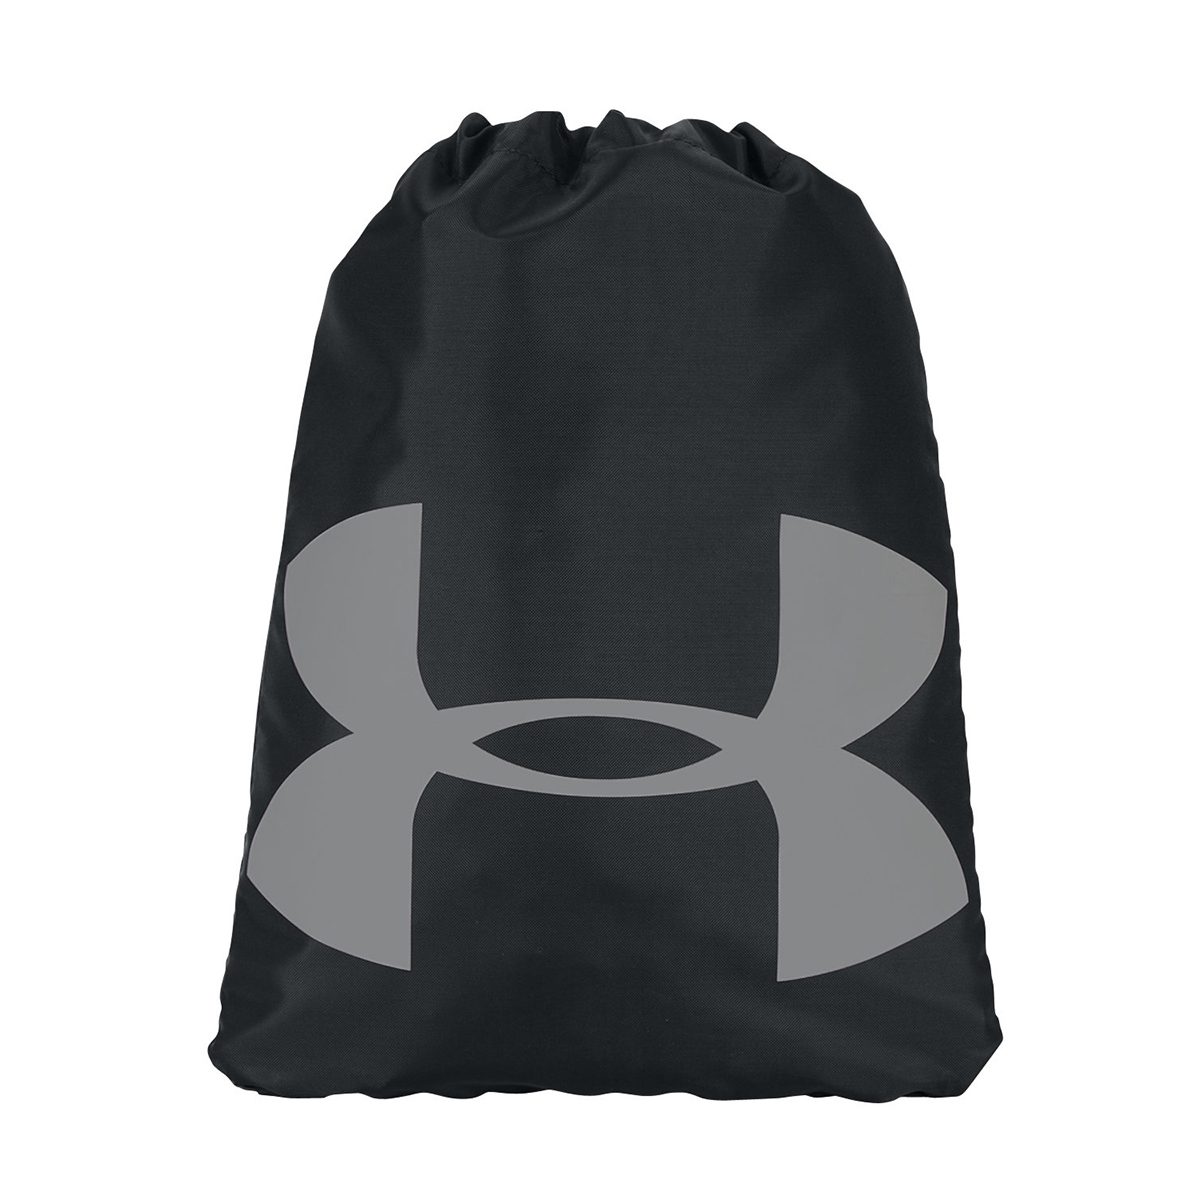 UNDER ARMOUR® Ozsee Sackpack #1240539 Black